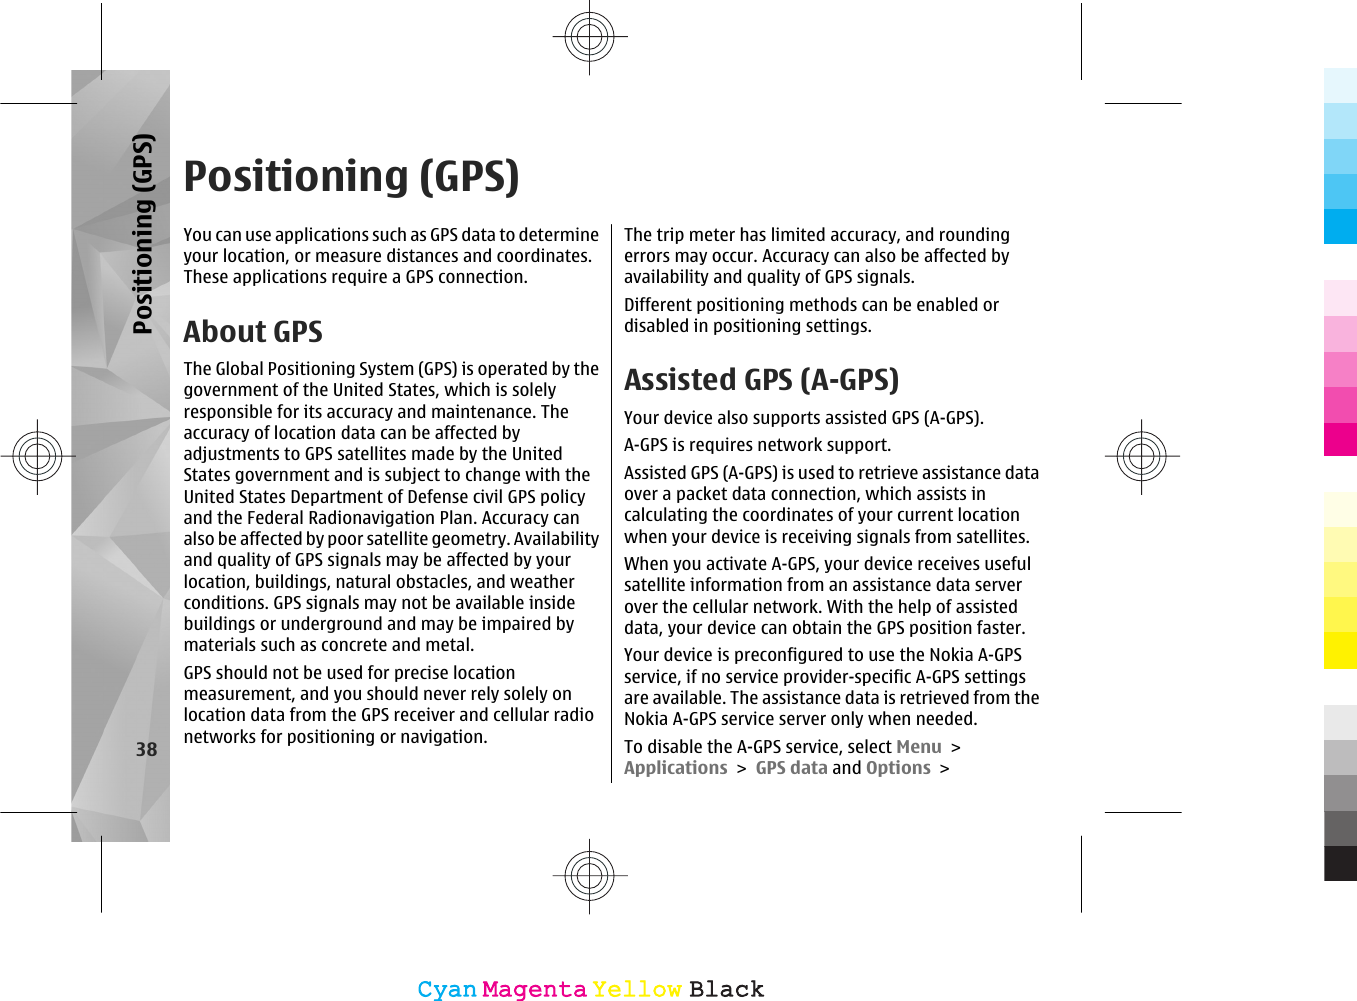 Positioning (GPS)You can use applications such as GPS data to determineyour location, or measure distances and coordinates.These applications require a GPS connection.About GPSThe Global Positioning System (GPS) is operated by thegovernment of the United States, which is solelyresponsible for its accuracy and maintenance. Theaccuracy of location data can be affected byadjustments to GPS satellites made by the UnitedStates government and is subject to change with theUnited States Department of Defense civil GPS policyand the Federal Radionavigation Plan. Accuracy canalso be affected by poor satellite geometry. Availabilityand quality of GPS signals may be affected by yourlocation, buildings, natural obstacles, and weatherconditions. GPS signals may not be available insidebuildings or underground and may be impaired bymaterials such as concrete and metal.GPS should not be used for precise locationmeasurement, and you should never rely solely onlocation data from the GPS receiver and cellular radionetworks for positioning or navigation.The trip meter has limited accuracy, and roundingerrors may occur. Accuracy can also be affected byavailability and quality of GPS signals.Different positioning methods can be enabled ordisabled in positioning settings.Assisted GPS (A-GPS)Your device also supports assisted GPS (A-GPS).A-GPS is requires network support.Assisted GPS (A-GPS) is used to retrieve assistance dataover a packet data connection, which assists incalculating the coordinates of your current locationwhen your device is receiving signals from satellites.When you activate A-GPS, your device receives usefulsatellite information from an assistance data serverover the cellular network. With the help of assisteddata, your device can obtain the GPS position faster.Your device is preconfigured to use the Nokia A-GPSservice, if no service provider-specific A-GPS settingsare available. The assistance data is retrieved from theNokia A-GPS service server only when needed.To disable the A-GPS service, select Menu &gt;Applications &gt; GPS data and Options &gt;38Positioning (GPS)CyanCyanMagentaMagentaYellowYellowBlackBlack